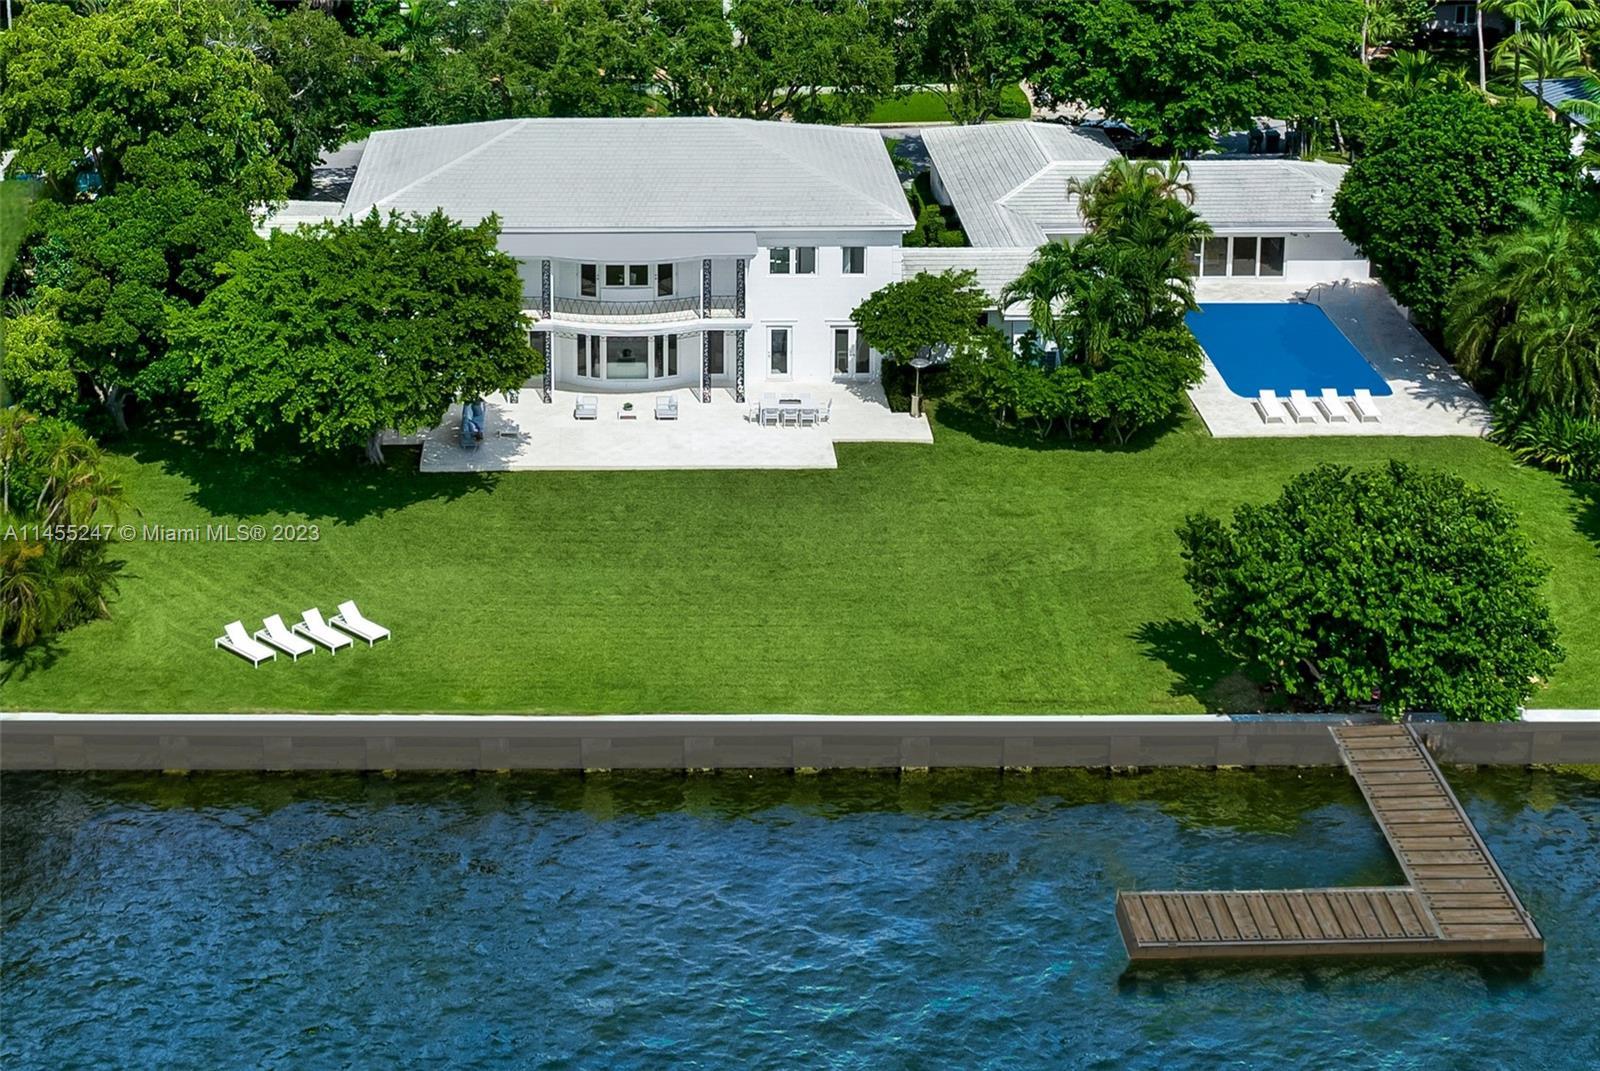 Step Inside With Me! A grand Bay Point estate originally built for a Miami industry pioneer. Situate